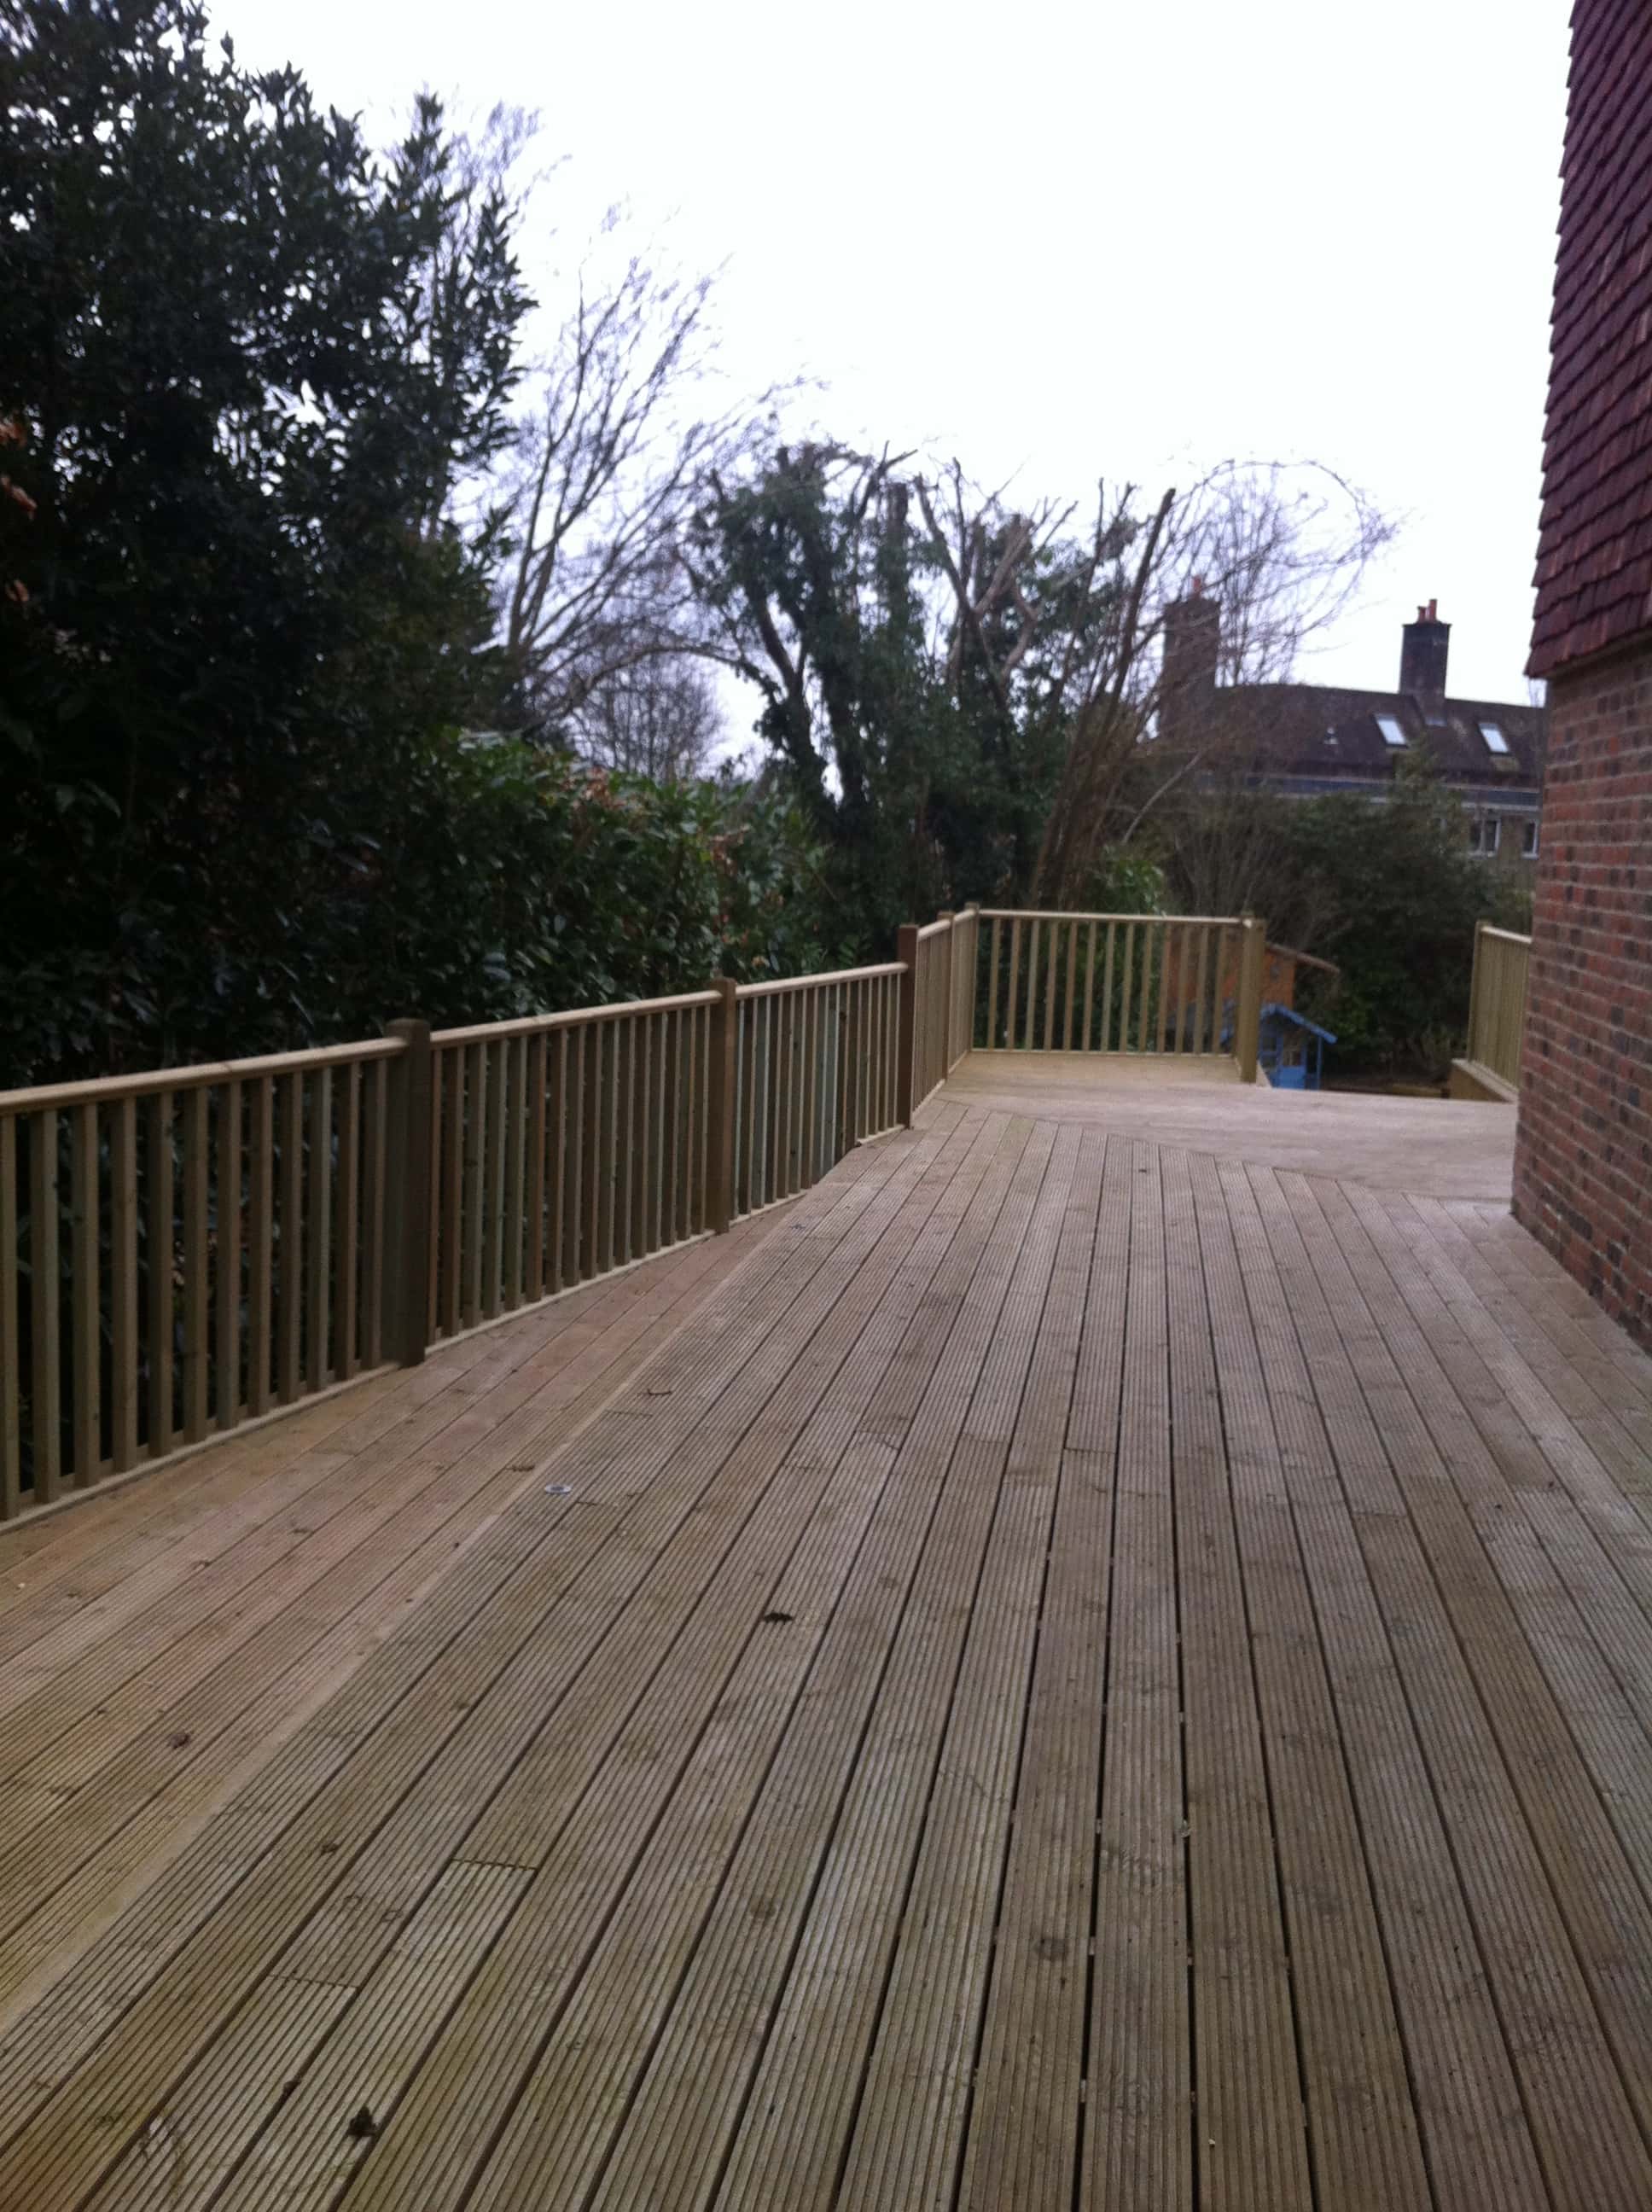 Haslemere after